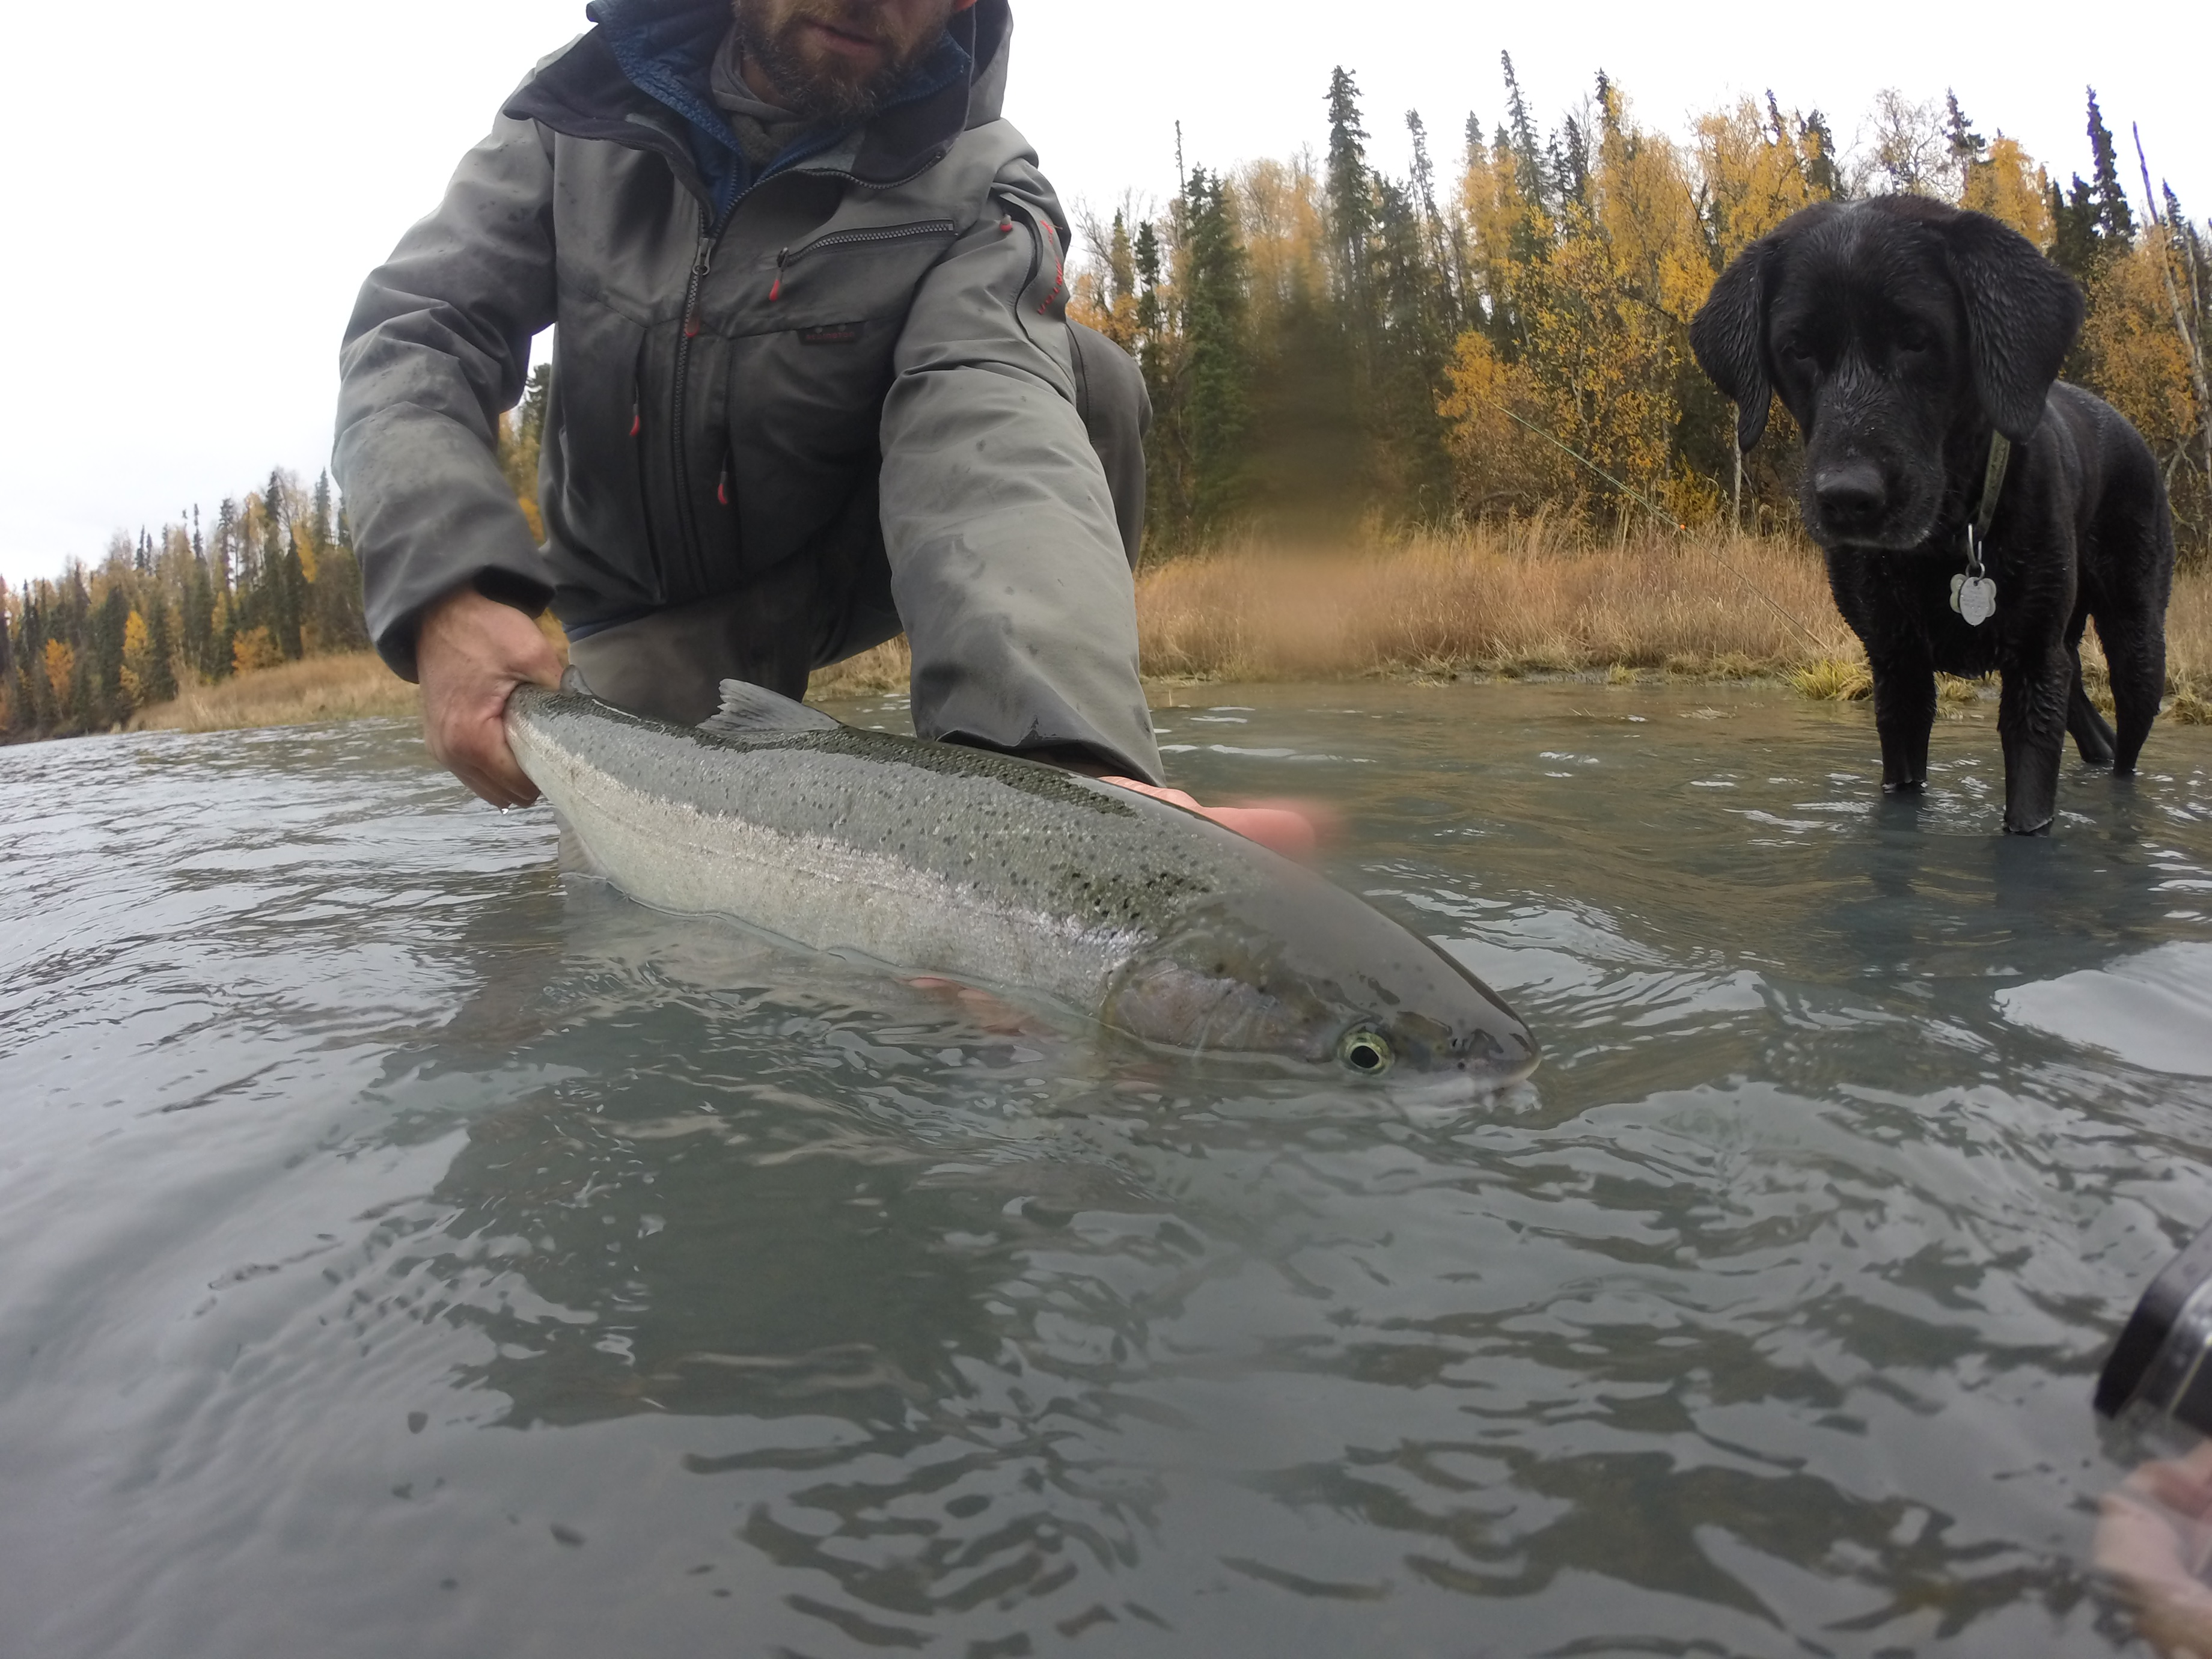 Dog looking at Steelhead in the river